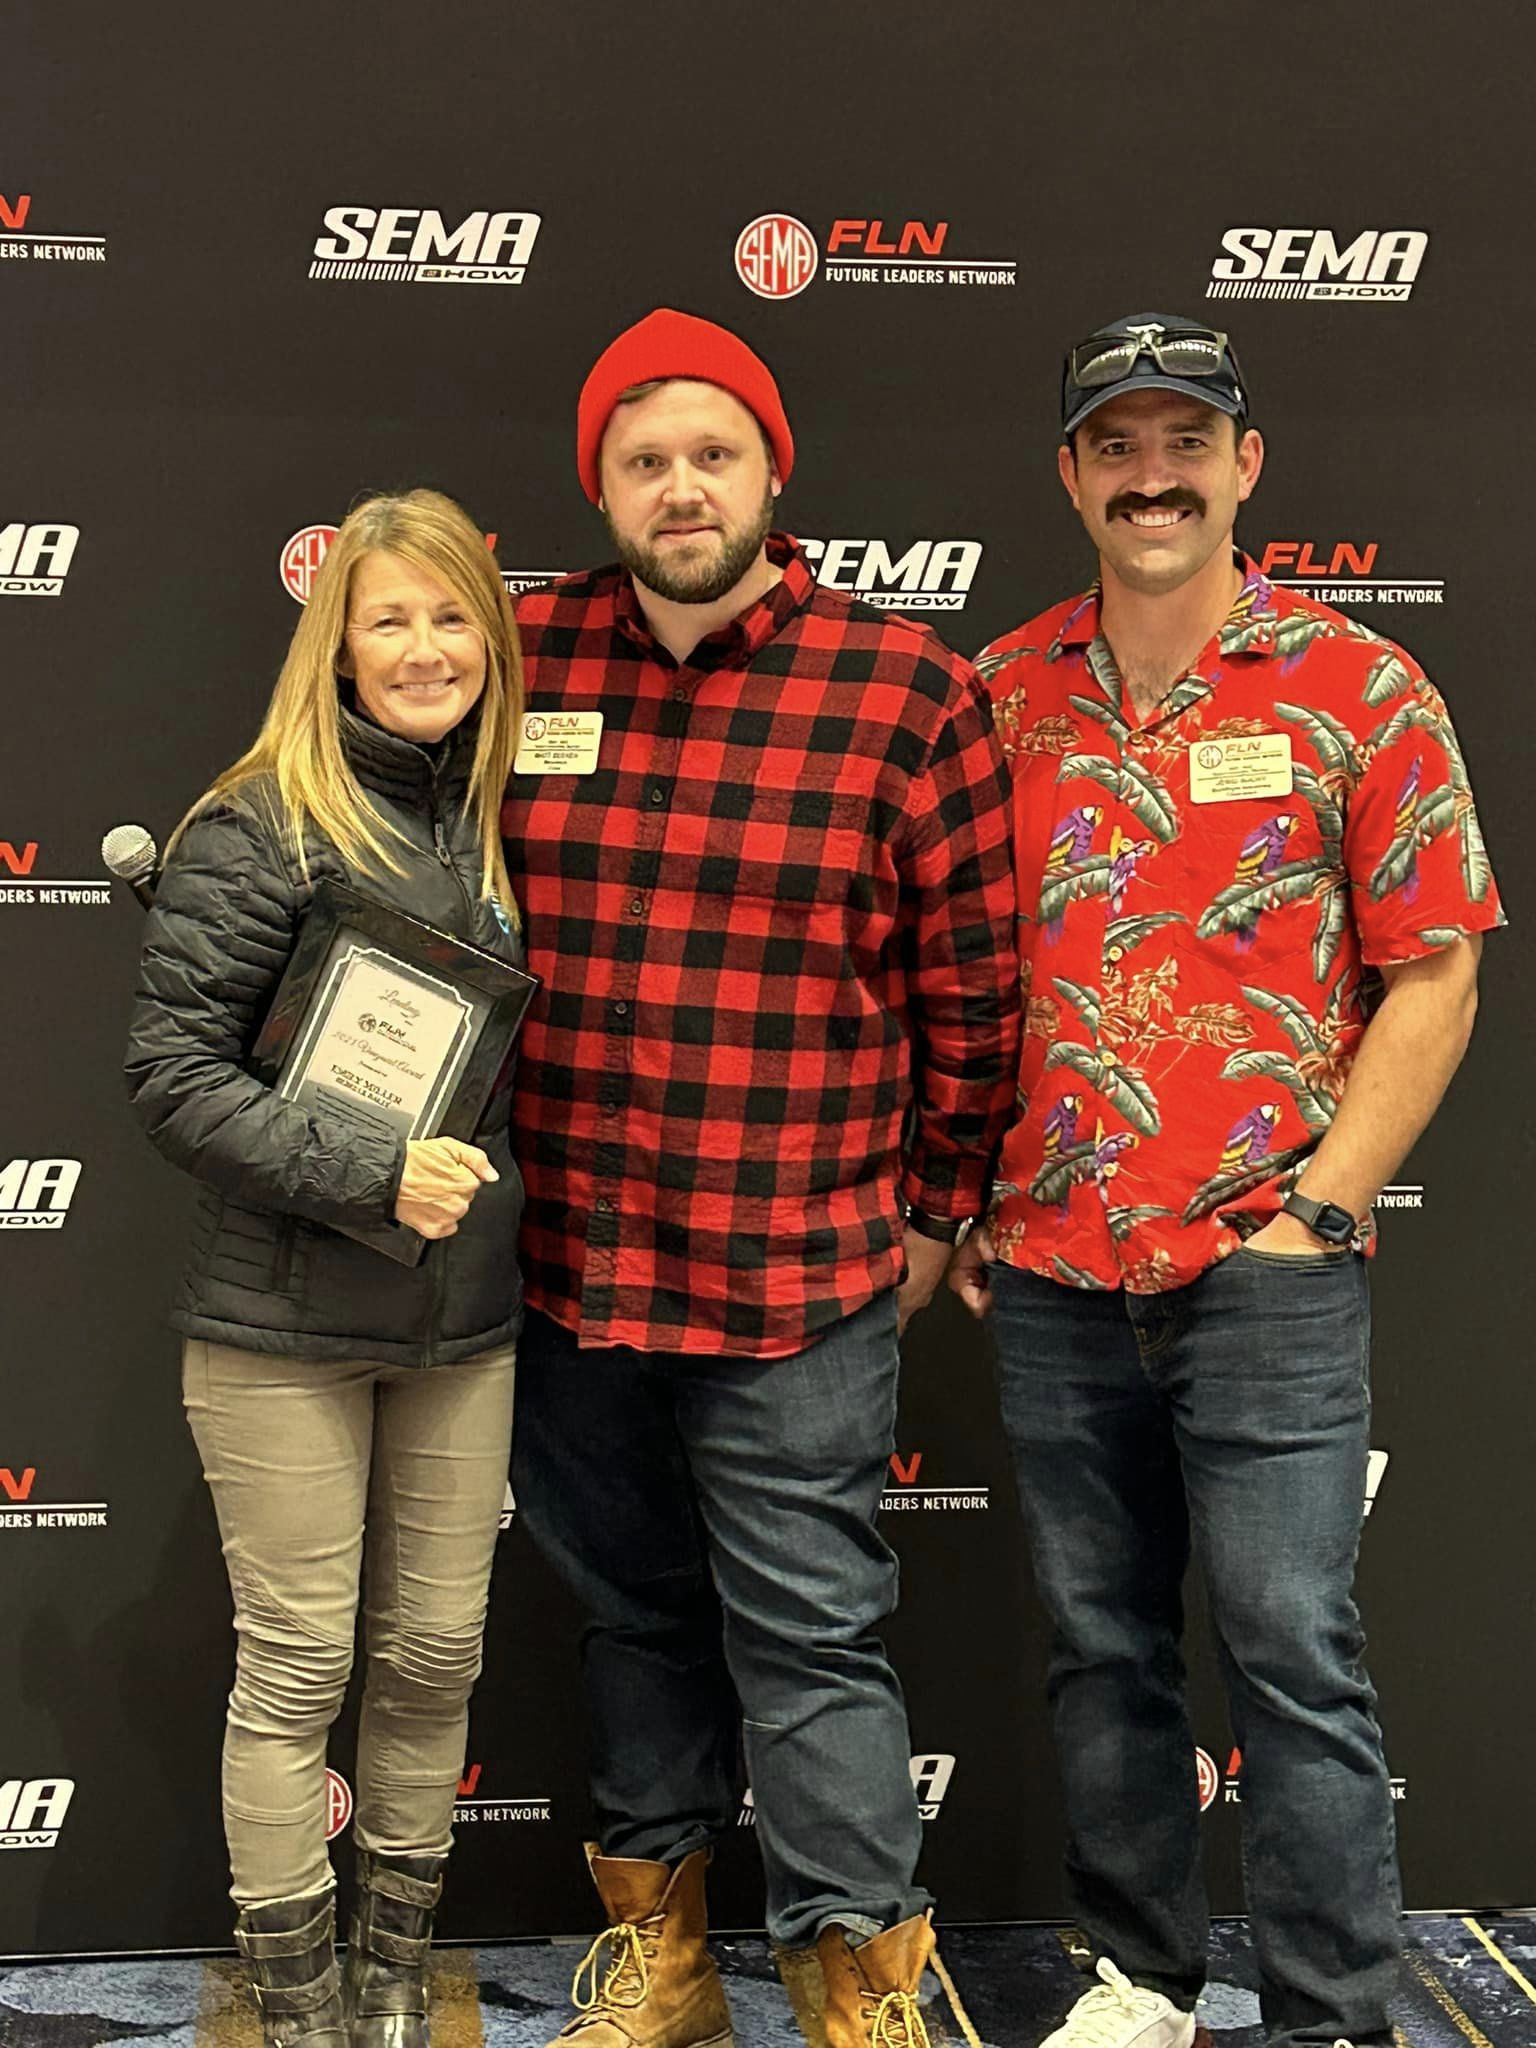 FLN Vanguard and Professional of the Year Awards Presented at SEMA Show 